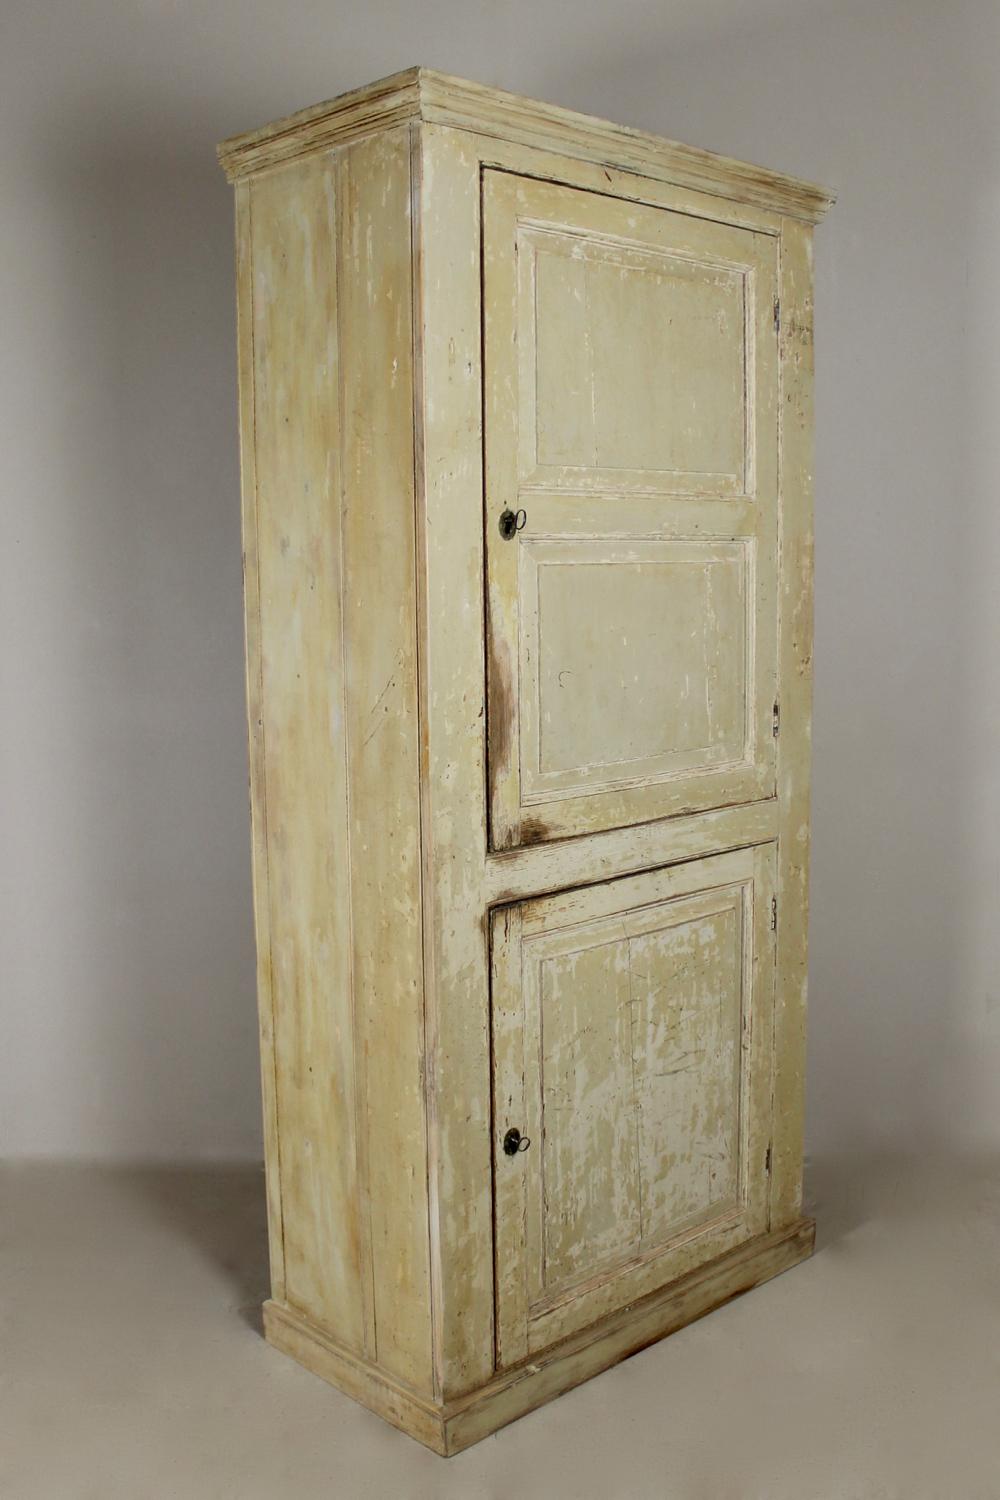 A lovely George III period, pine hall or kitchen cupboard. Dry scraped back to its original off white paint, retaining its original locks and keys, the interior with original reeded front shelves and repainted.
English, circa 1780.